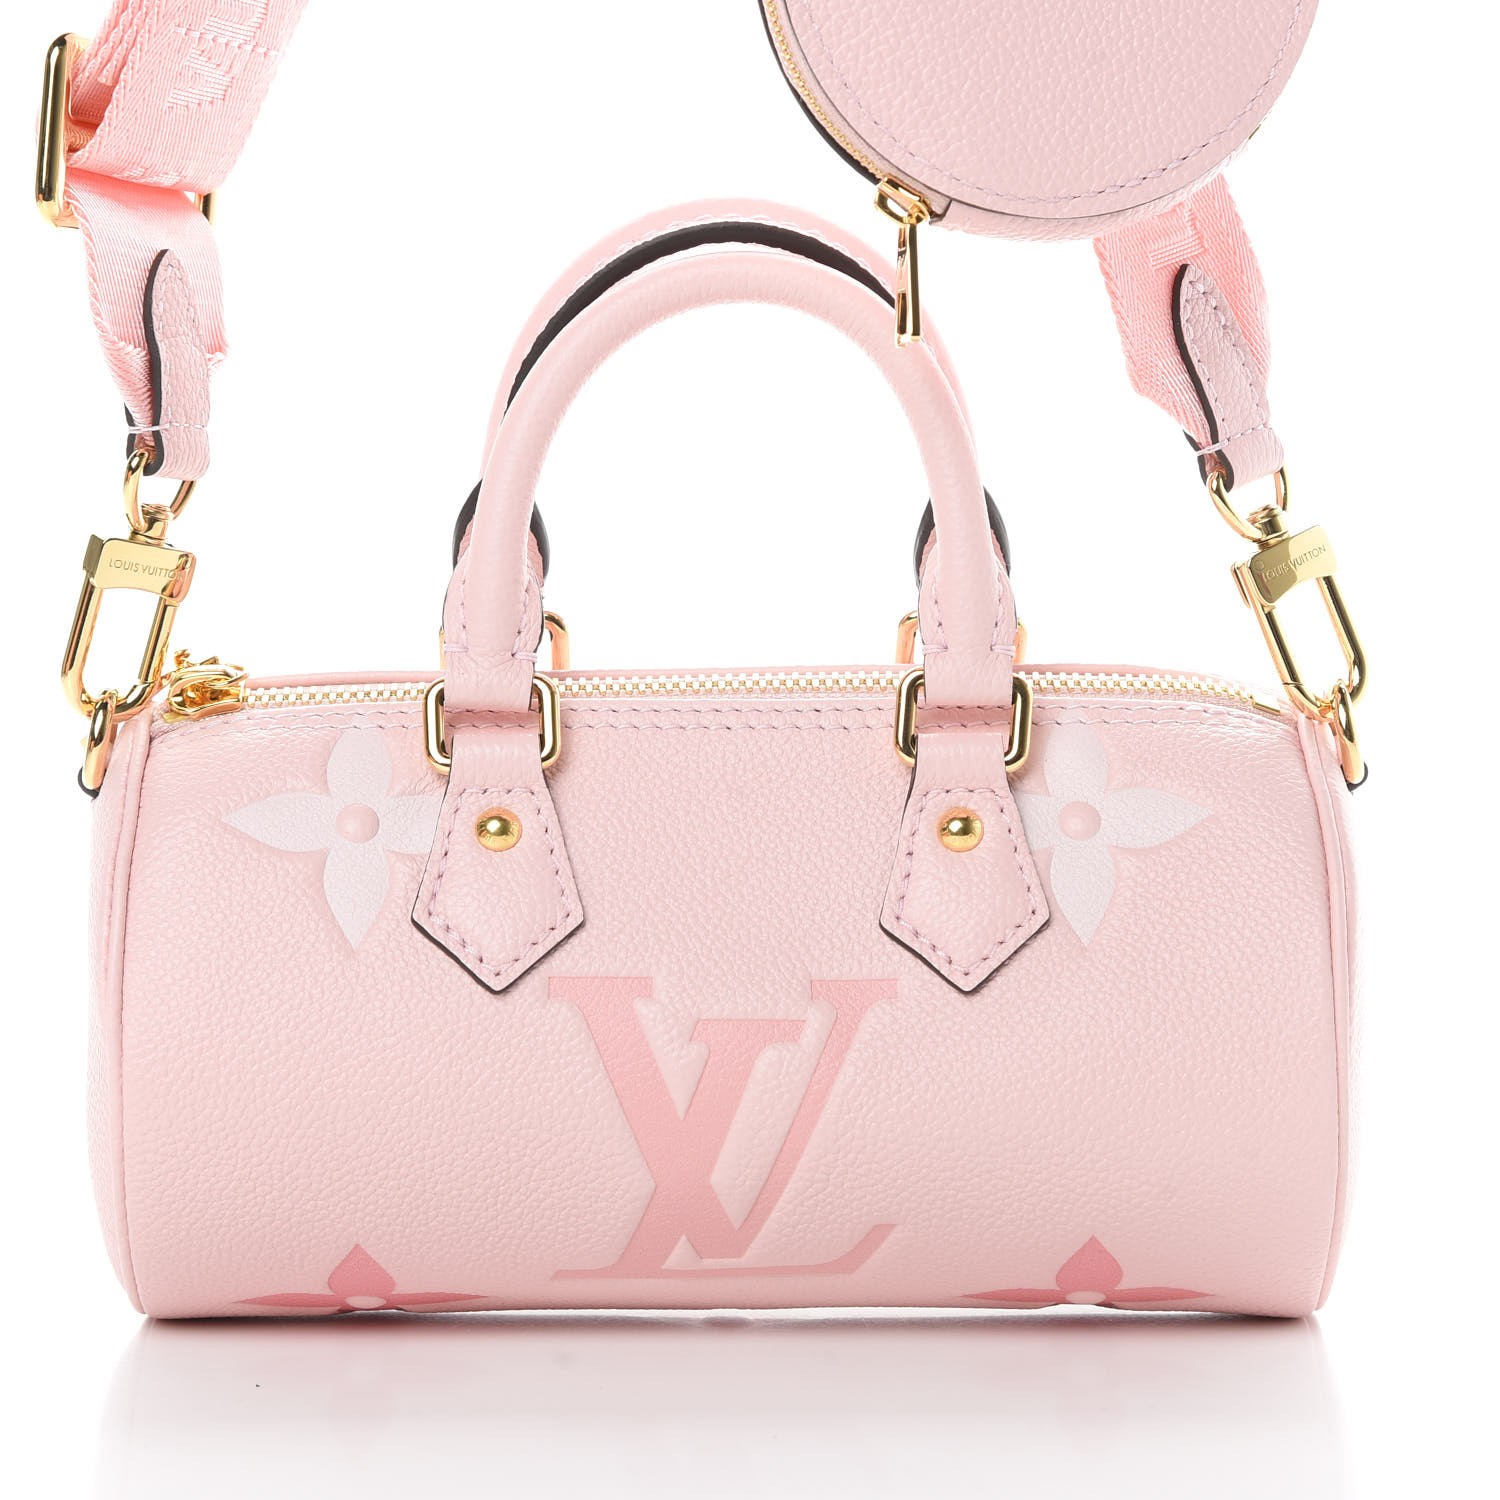 LOUIS VUITTON BY THE POOL COLLECTION is tempting me!!! Felice and Papillon  BB & what's in my bag? 